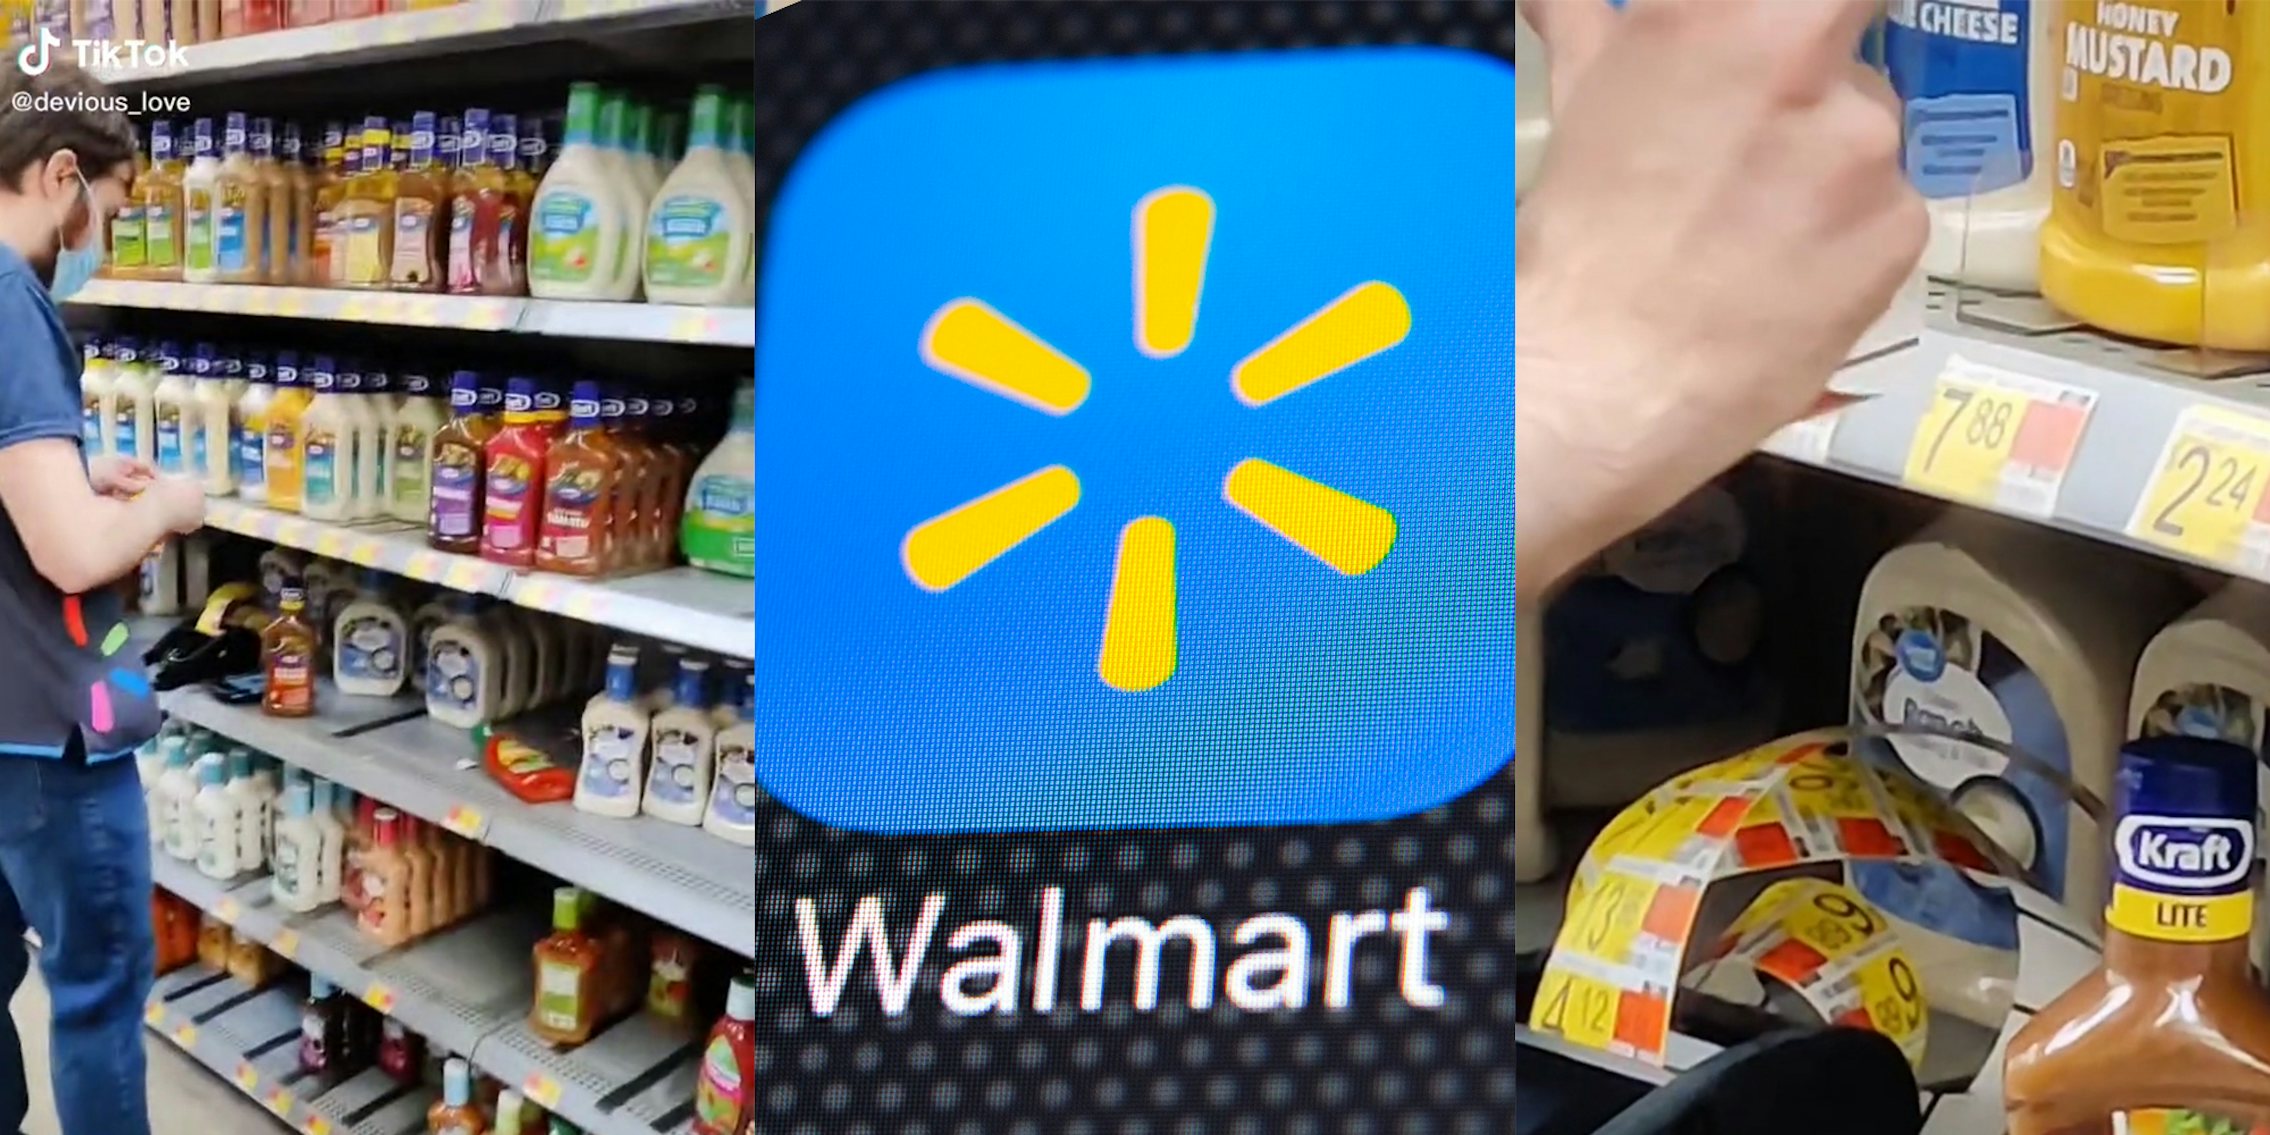 walmart worker changing price tags of salad dressing from 2.24 to 7.88 (l & r) walmart logo (c)